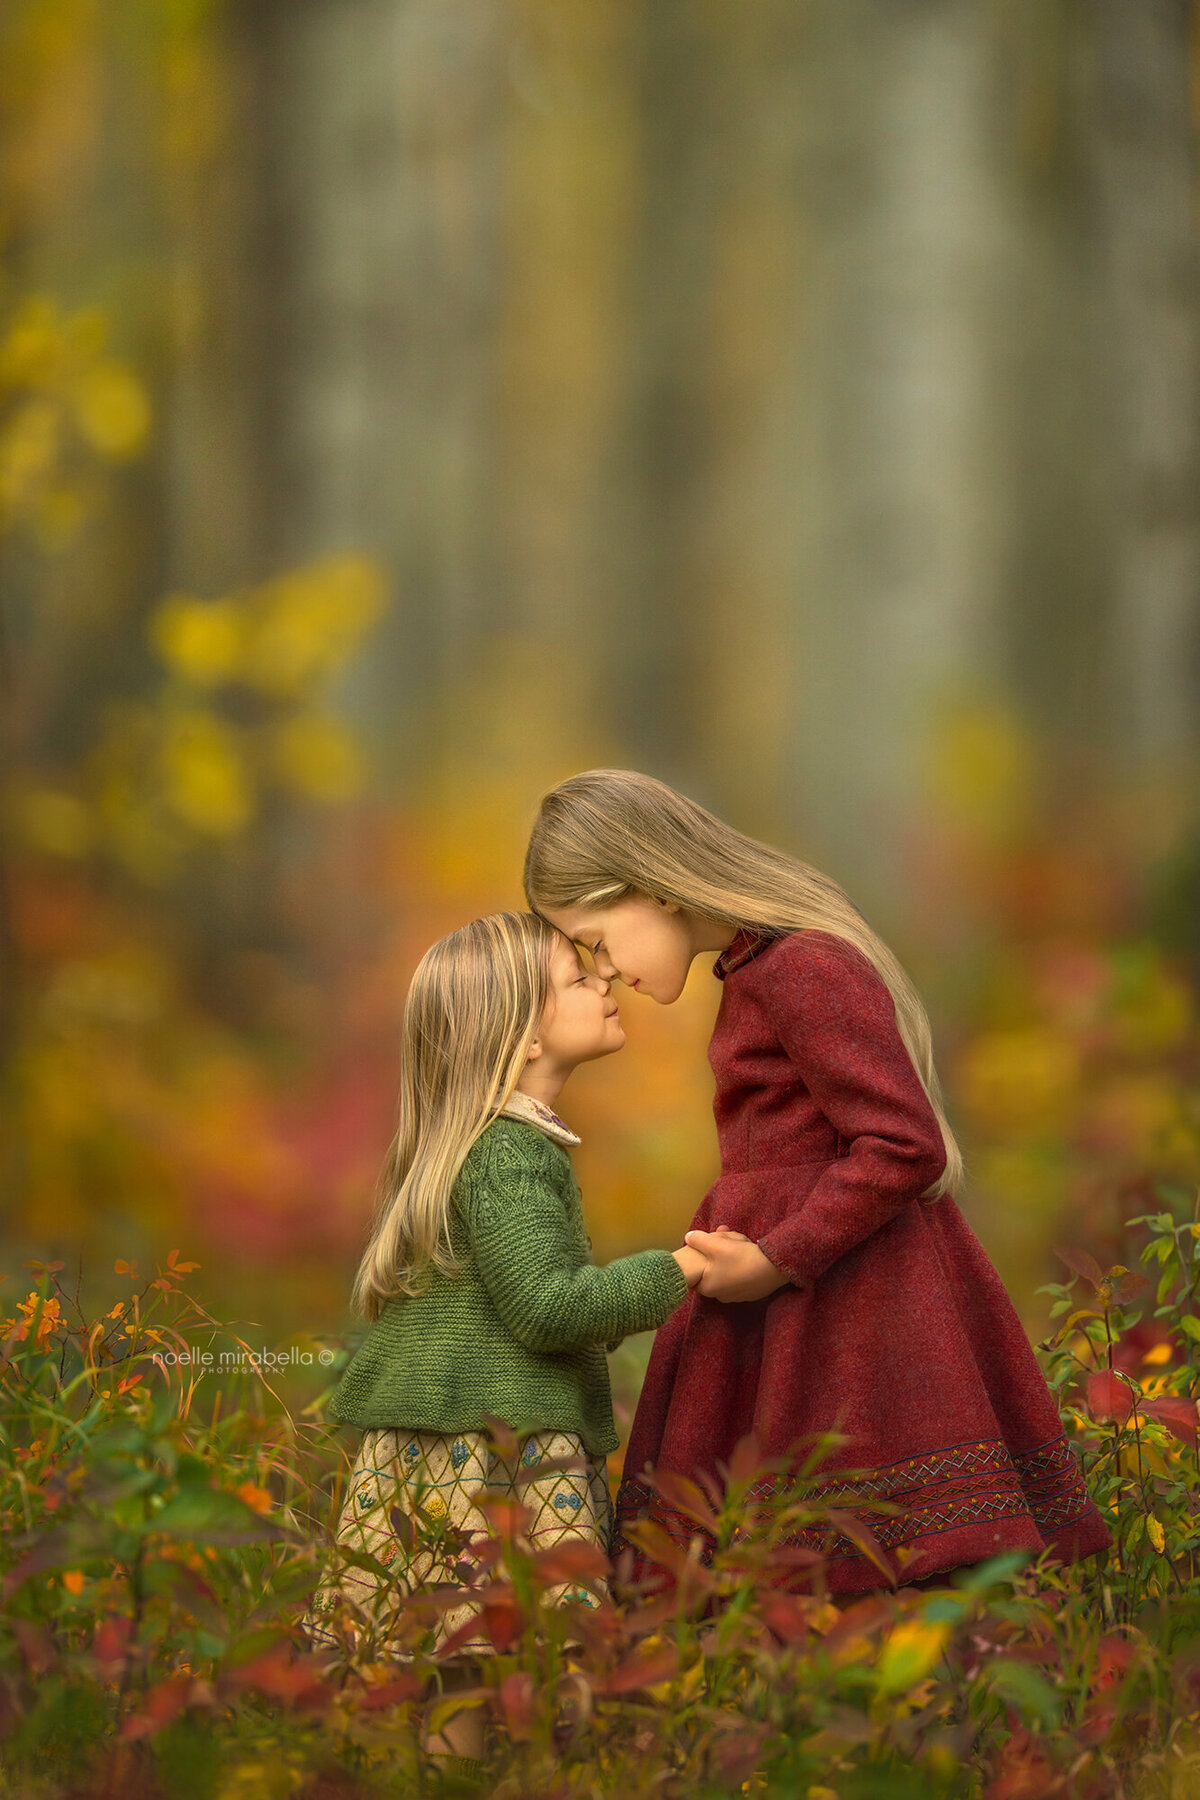 Girls in wool dresses holding hands in autumn.